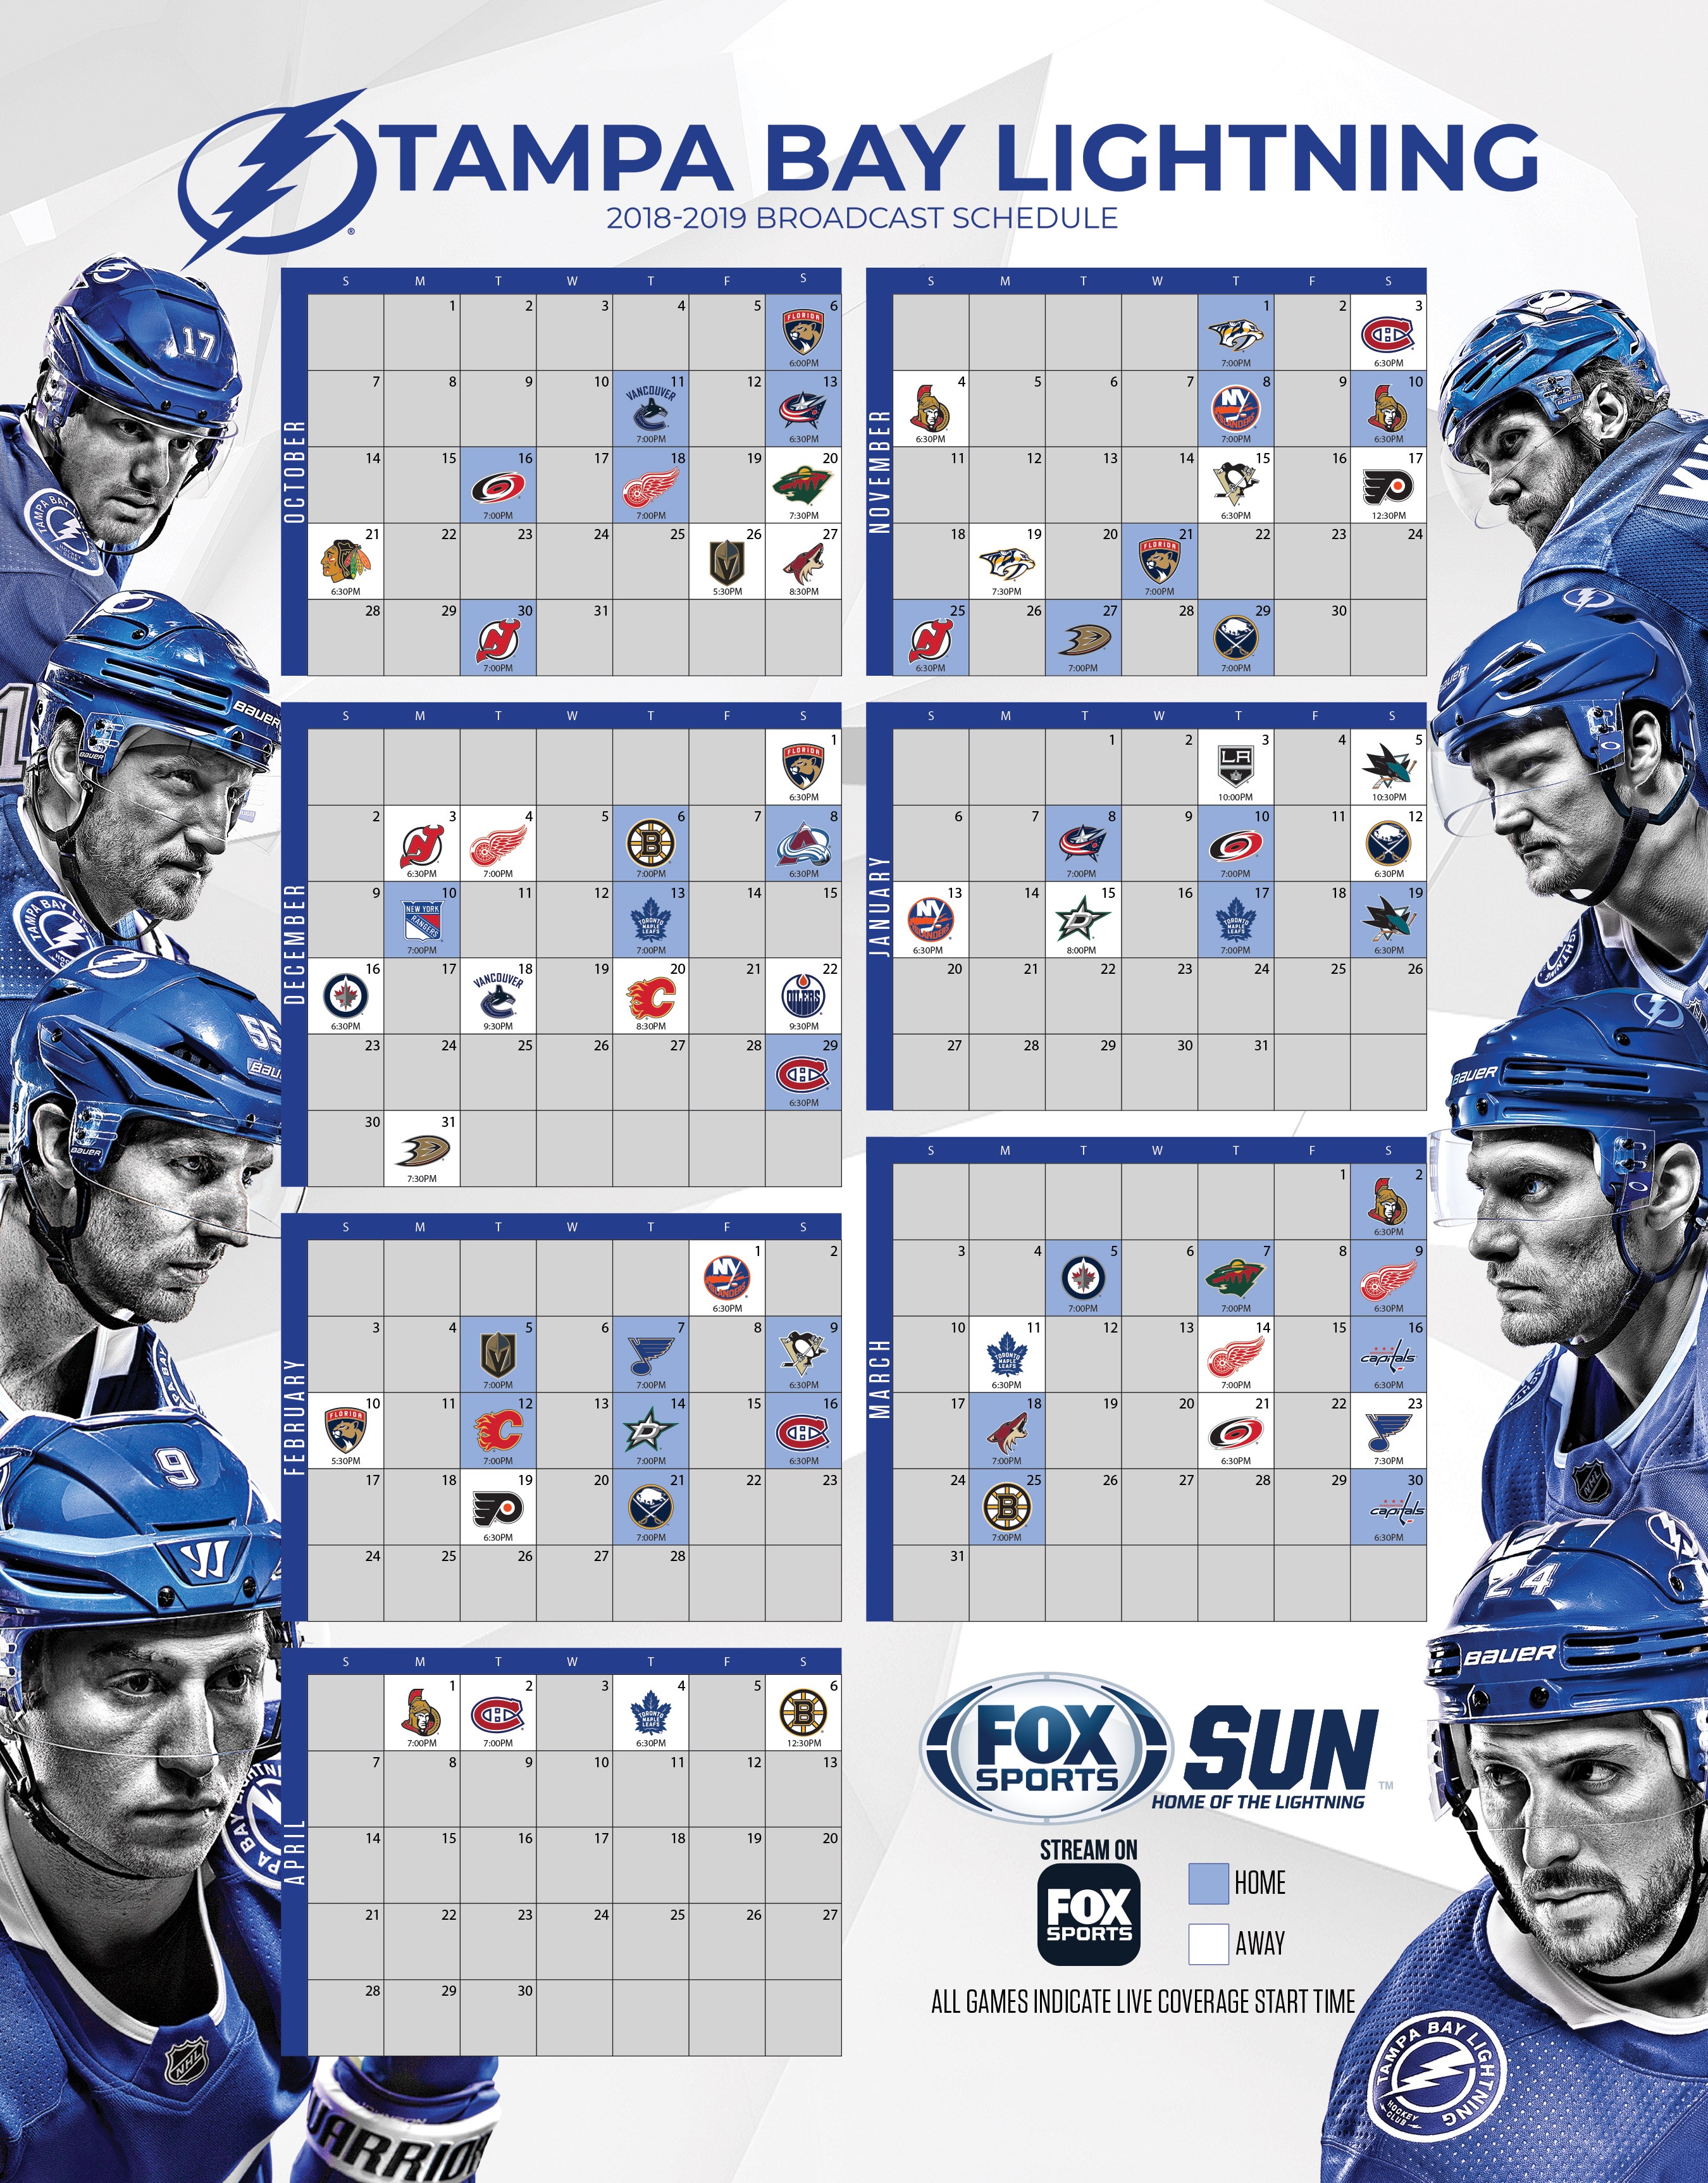 FOX Sports Sun announces Tampa Bay Lightning broadcast schedule for